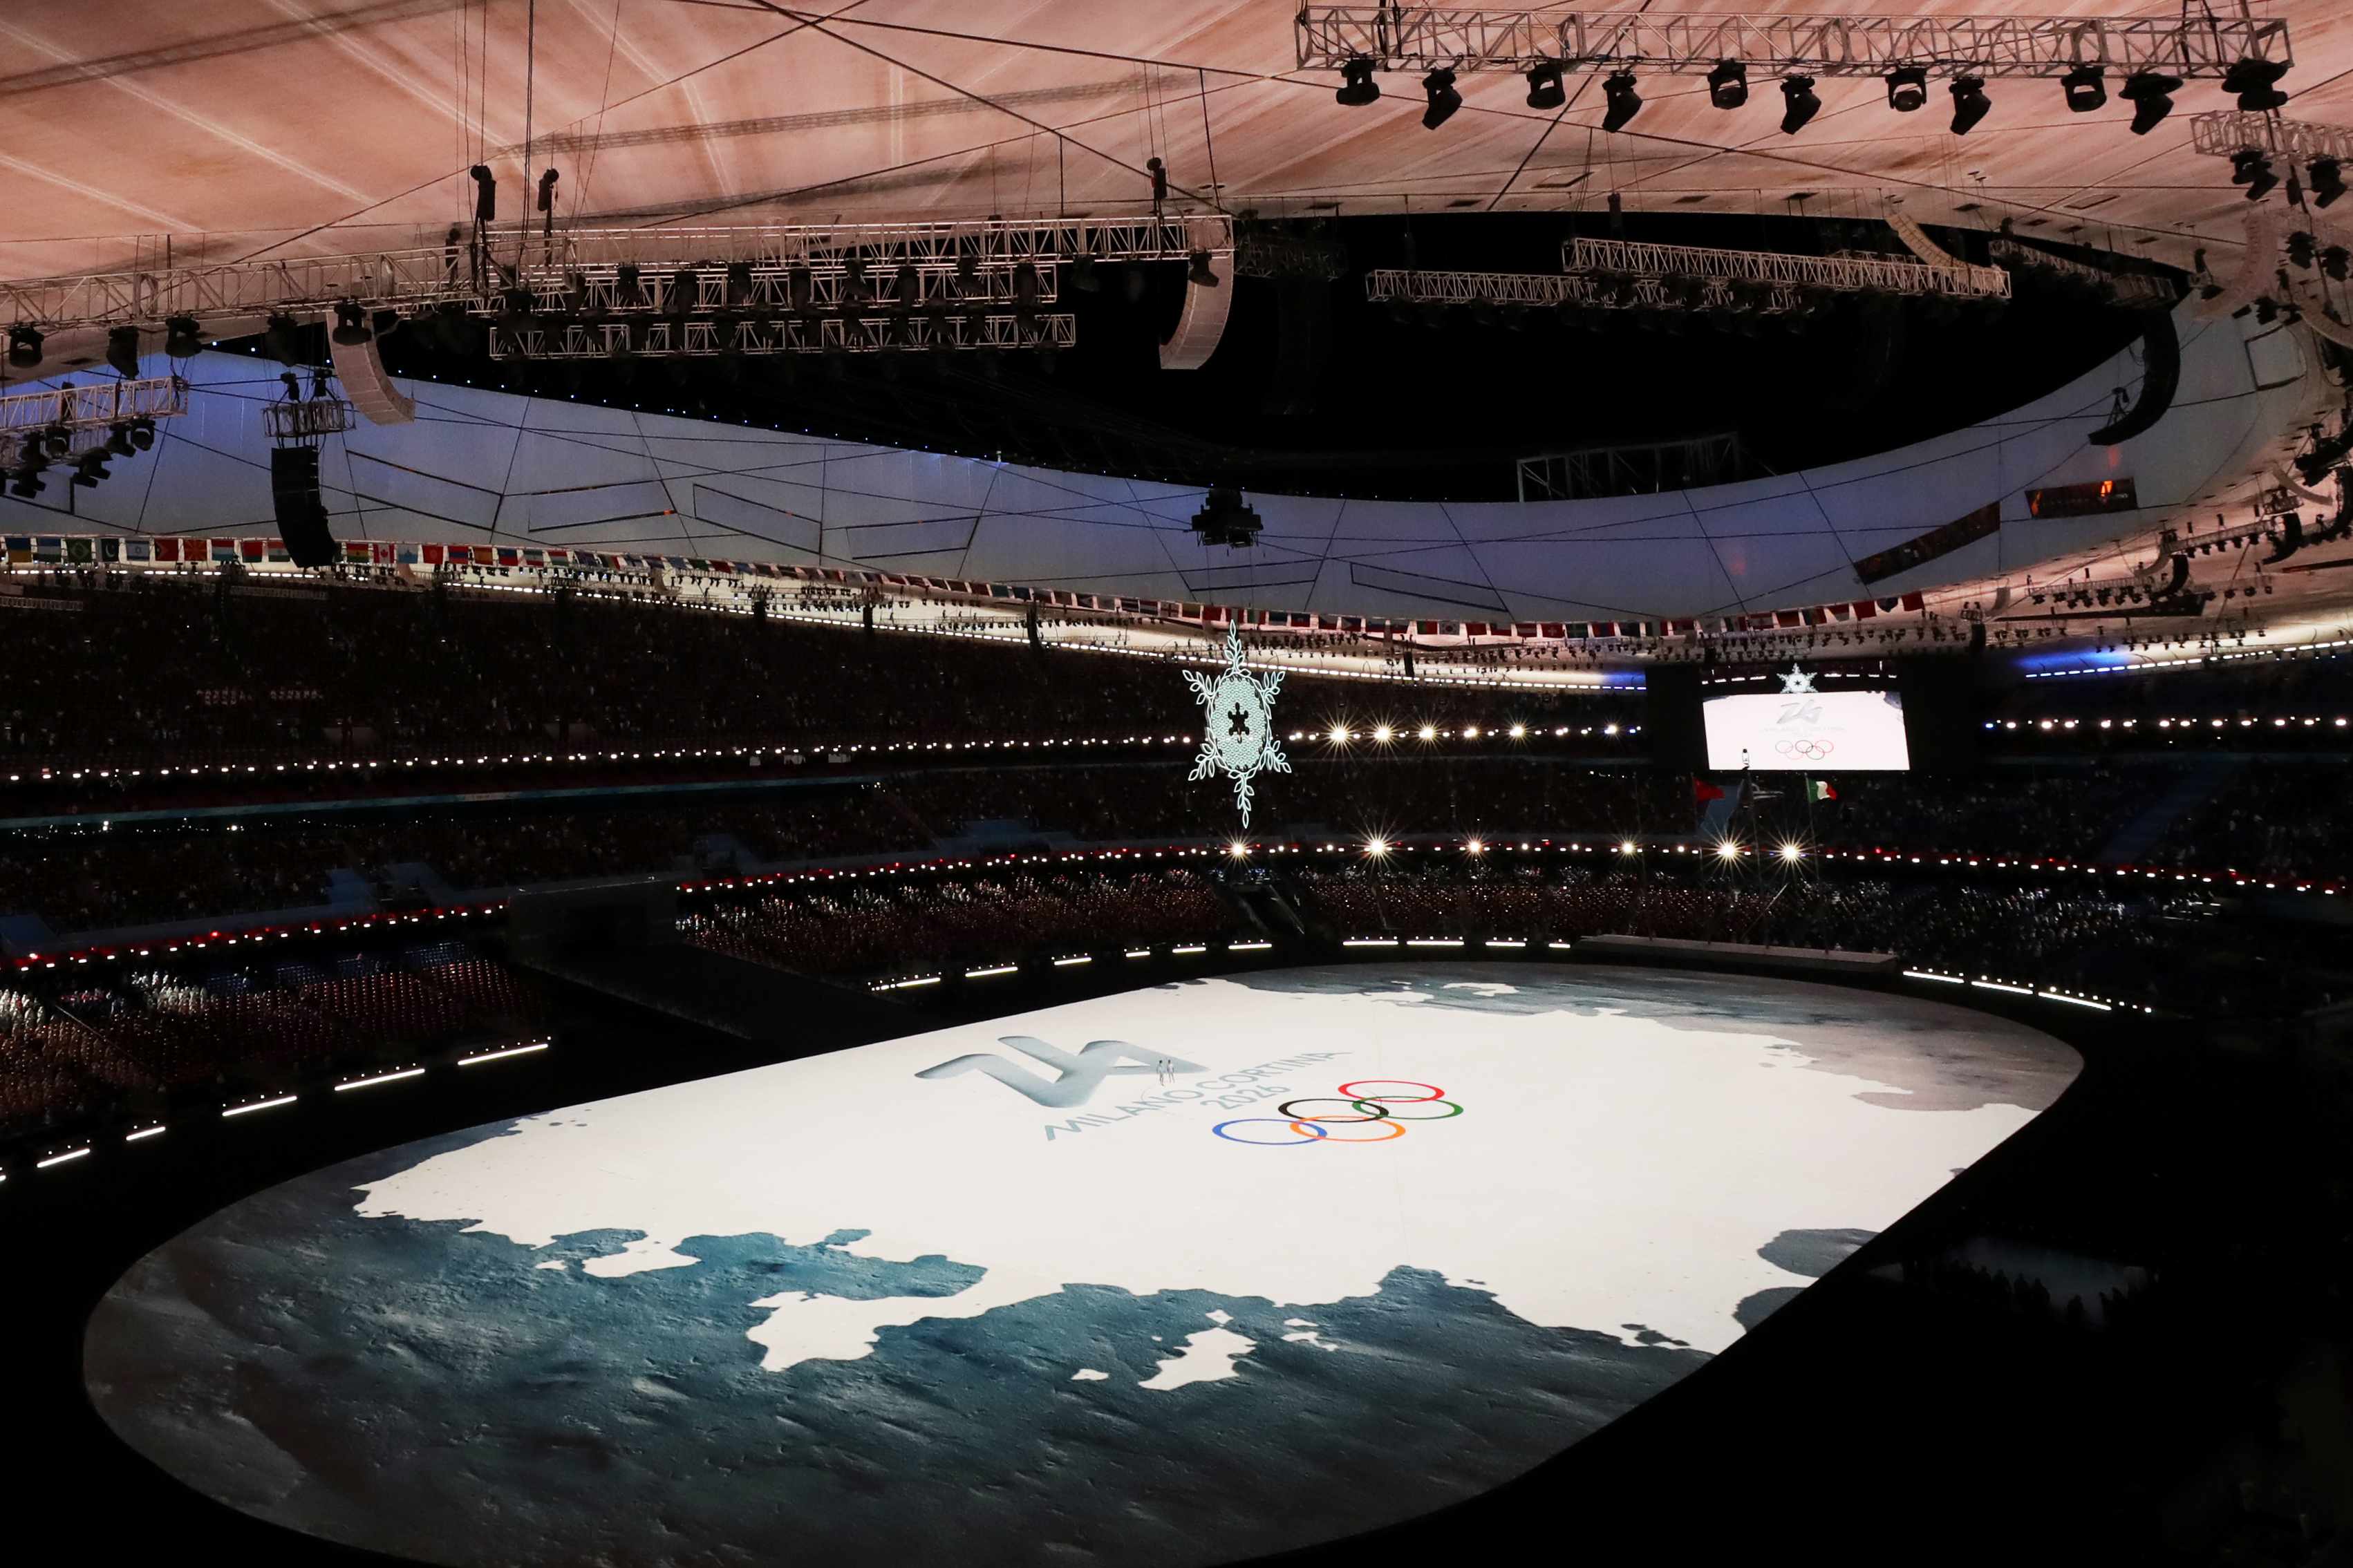 General view inside of the Beijing National Stadium during the Beijing 2022 Winter Olympics Closing Ceremony